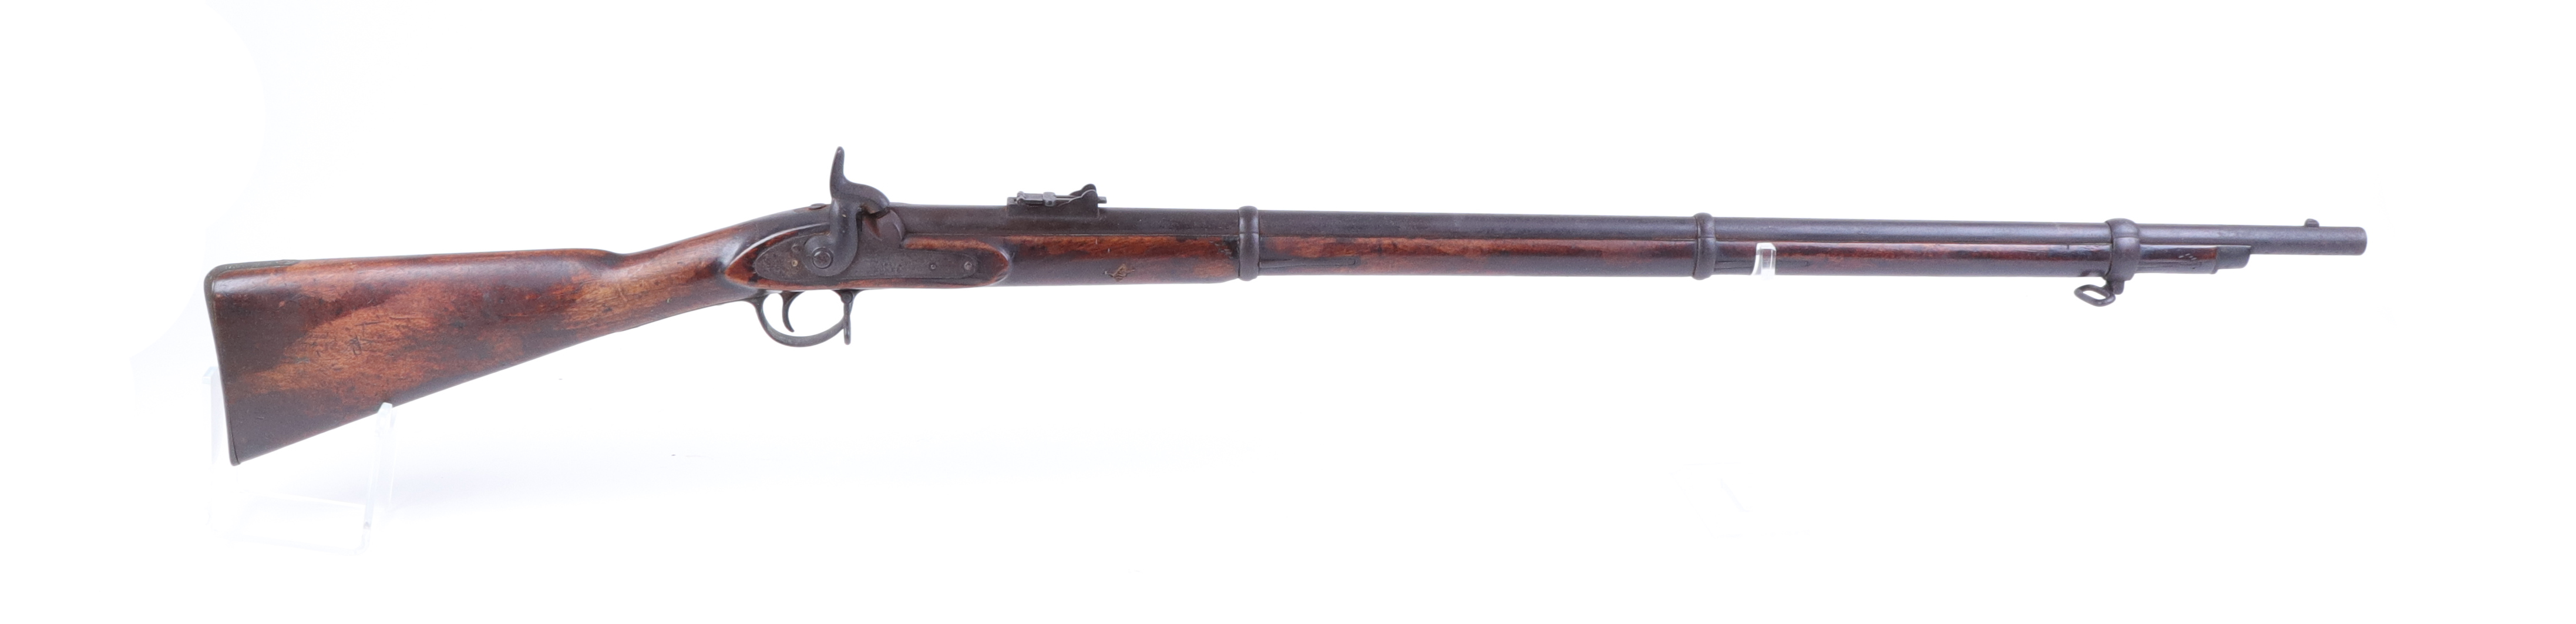 (S58) .577 Tower Enfield percussion smooth bore musket, 38½ ins barrel with blade and ramp sights - Image 3 of 11